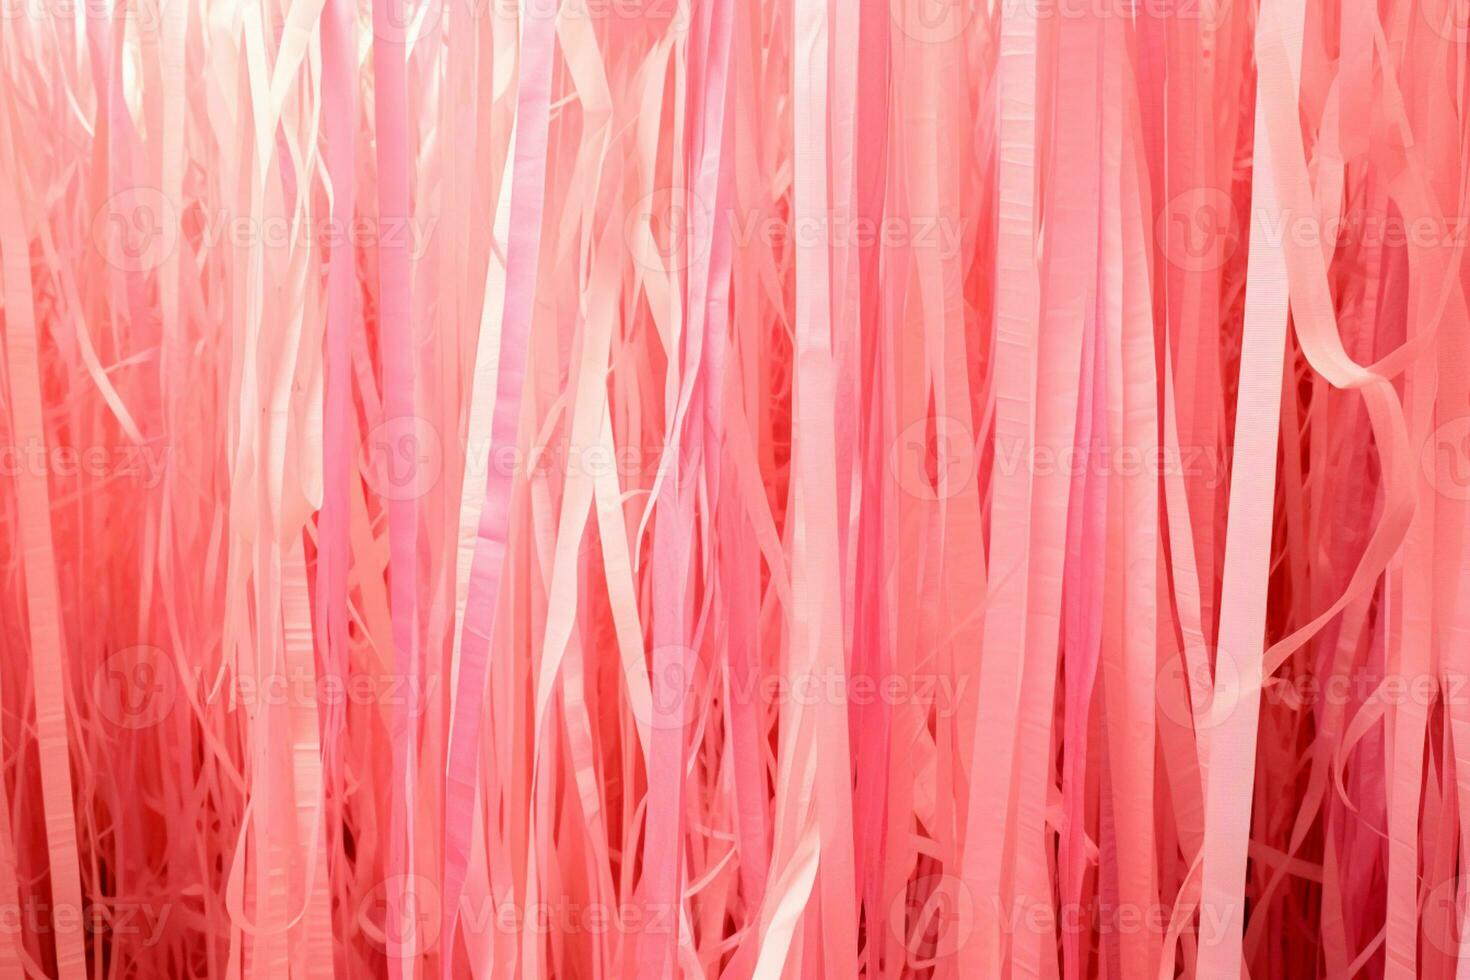 Pink October - Fight against breast cancer. Ribbons hang in soft pink tones, a symbol of awareness for the early detection of breast cancer. Ribbons in different shades of pink. AI Generative photo